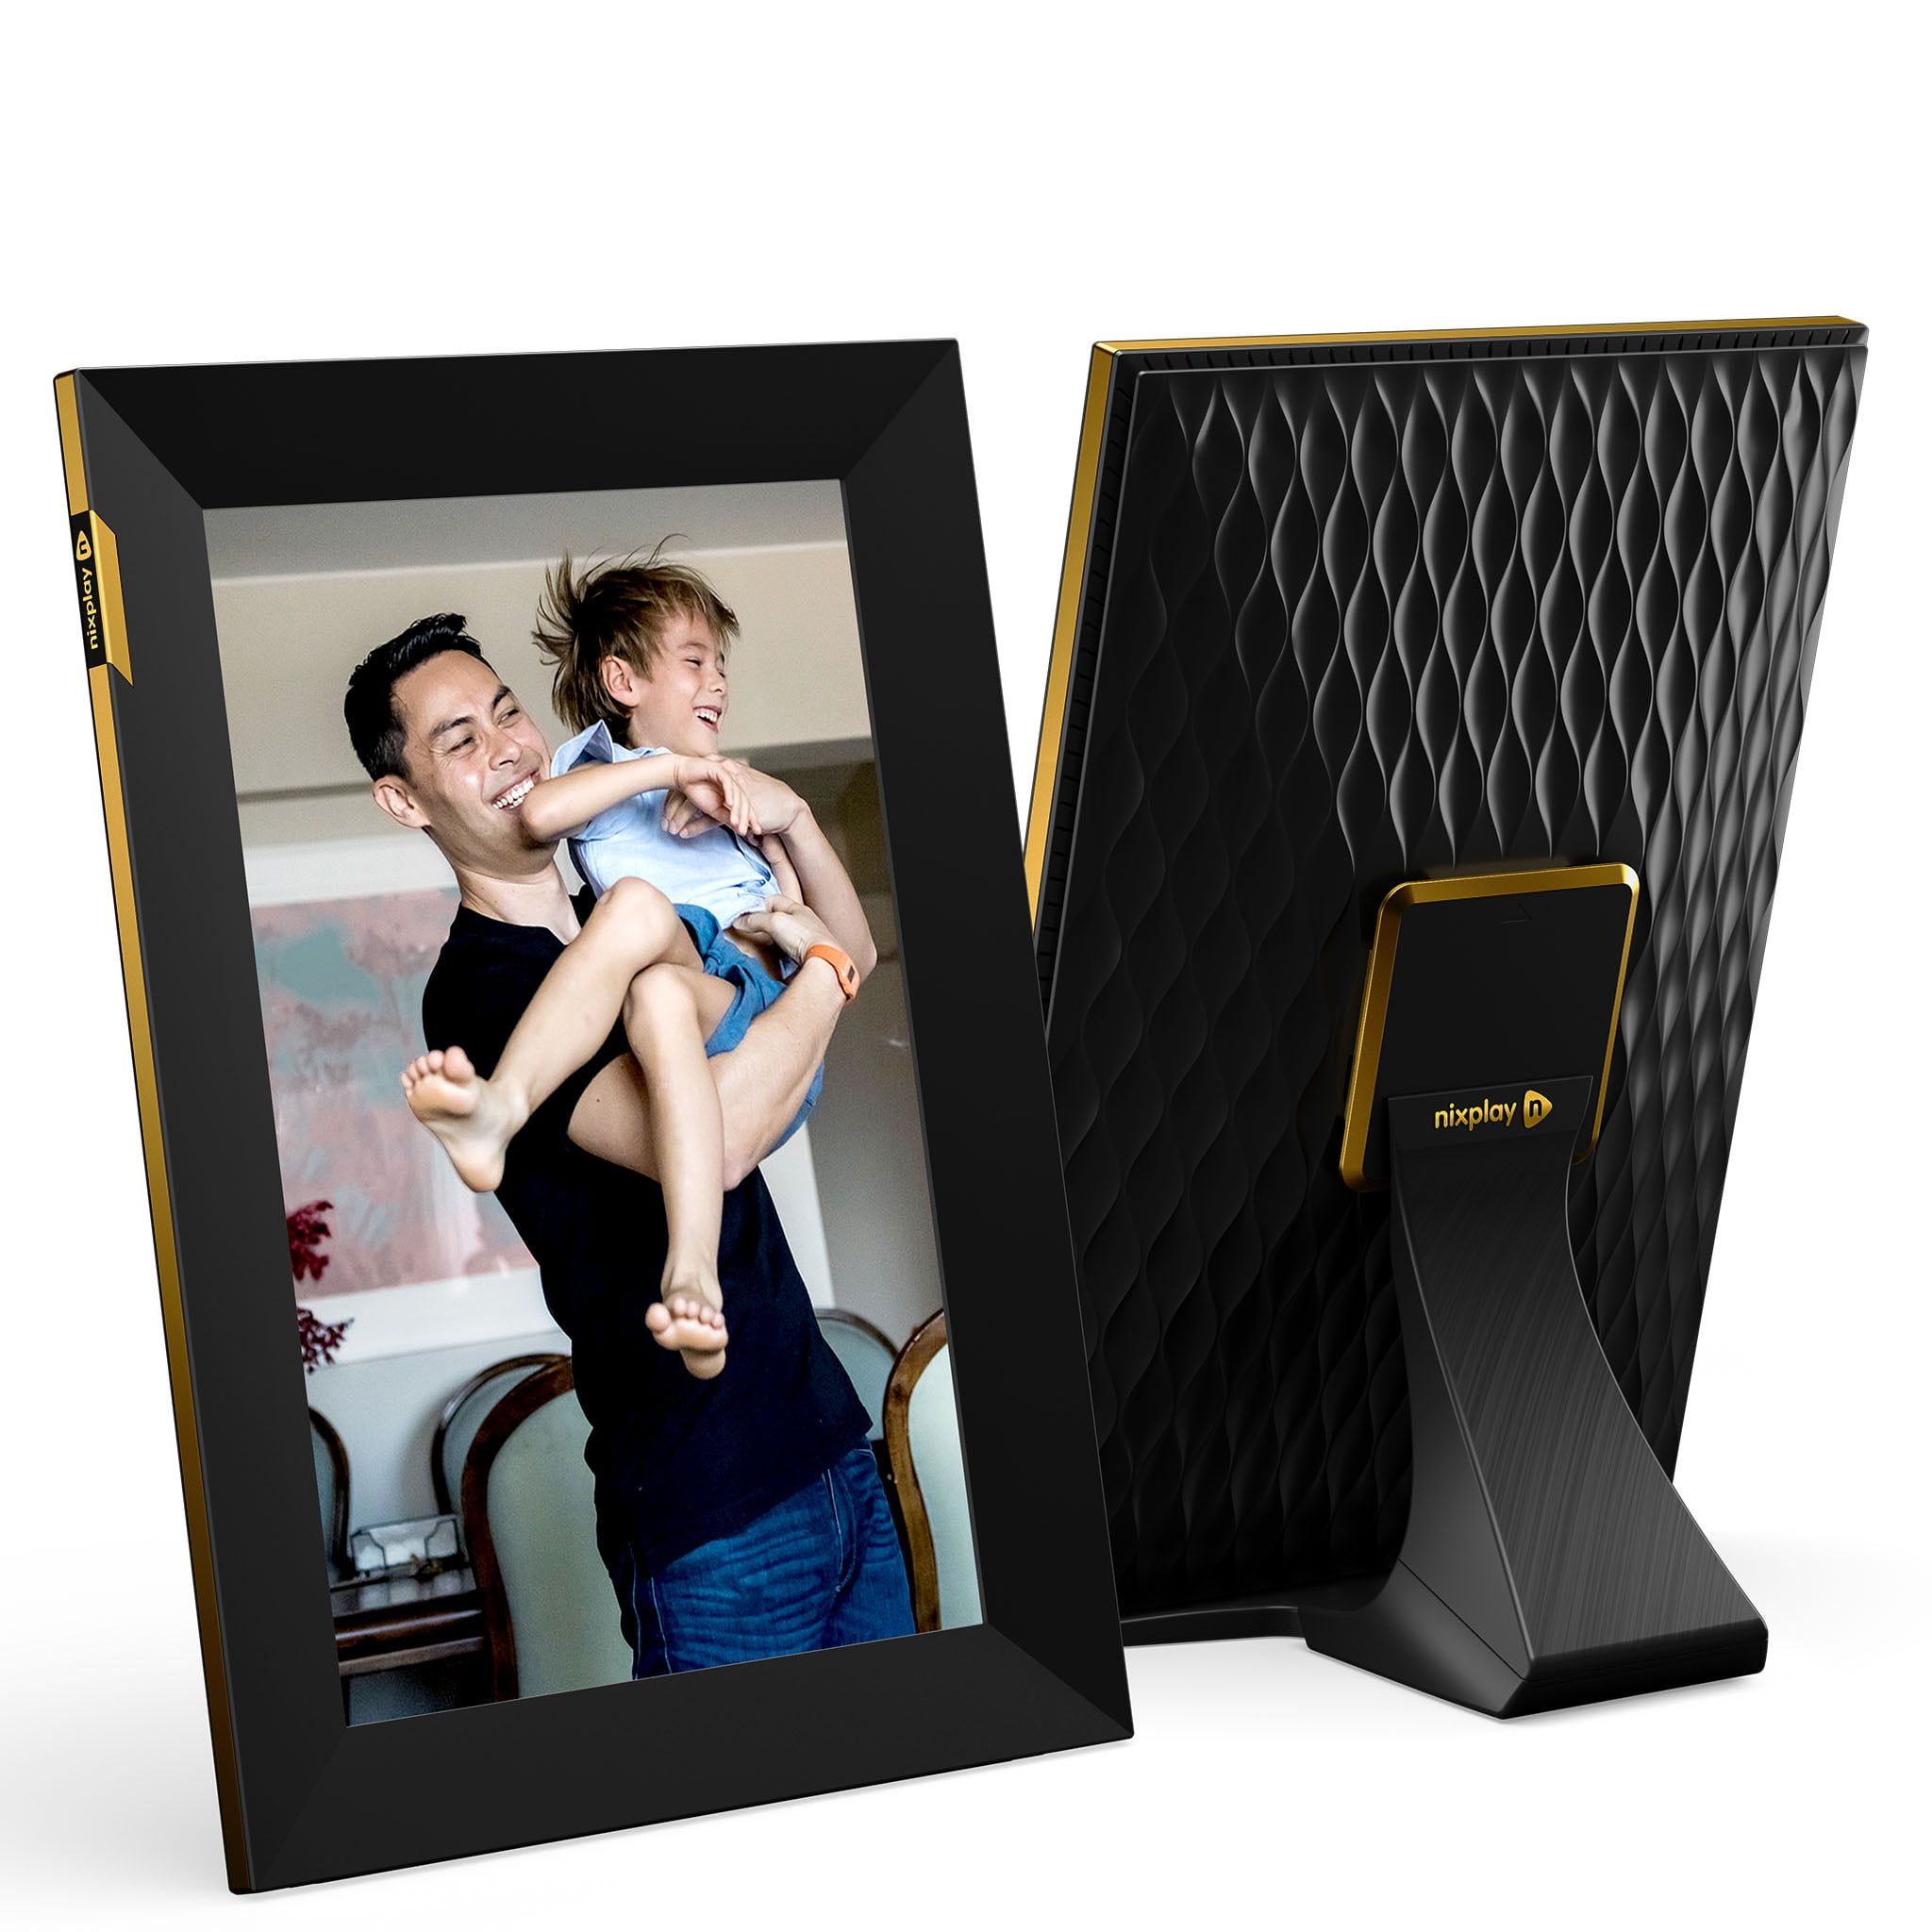 10.1 inch Touch Screen Digital Picture Frame with WiFi